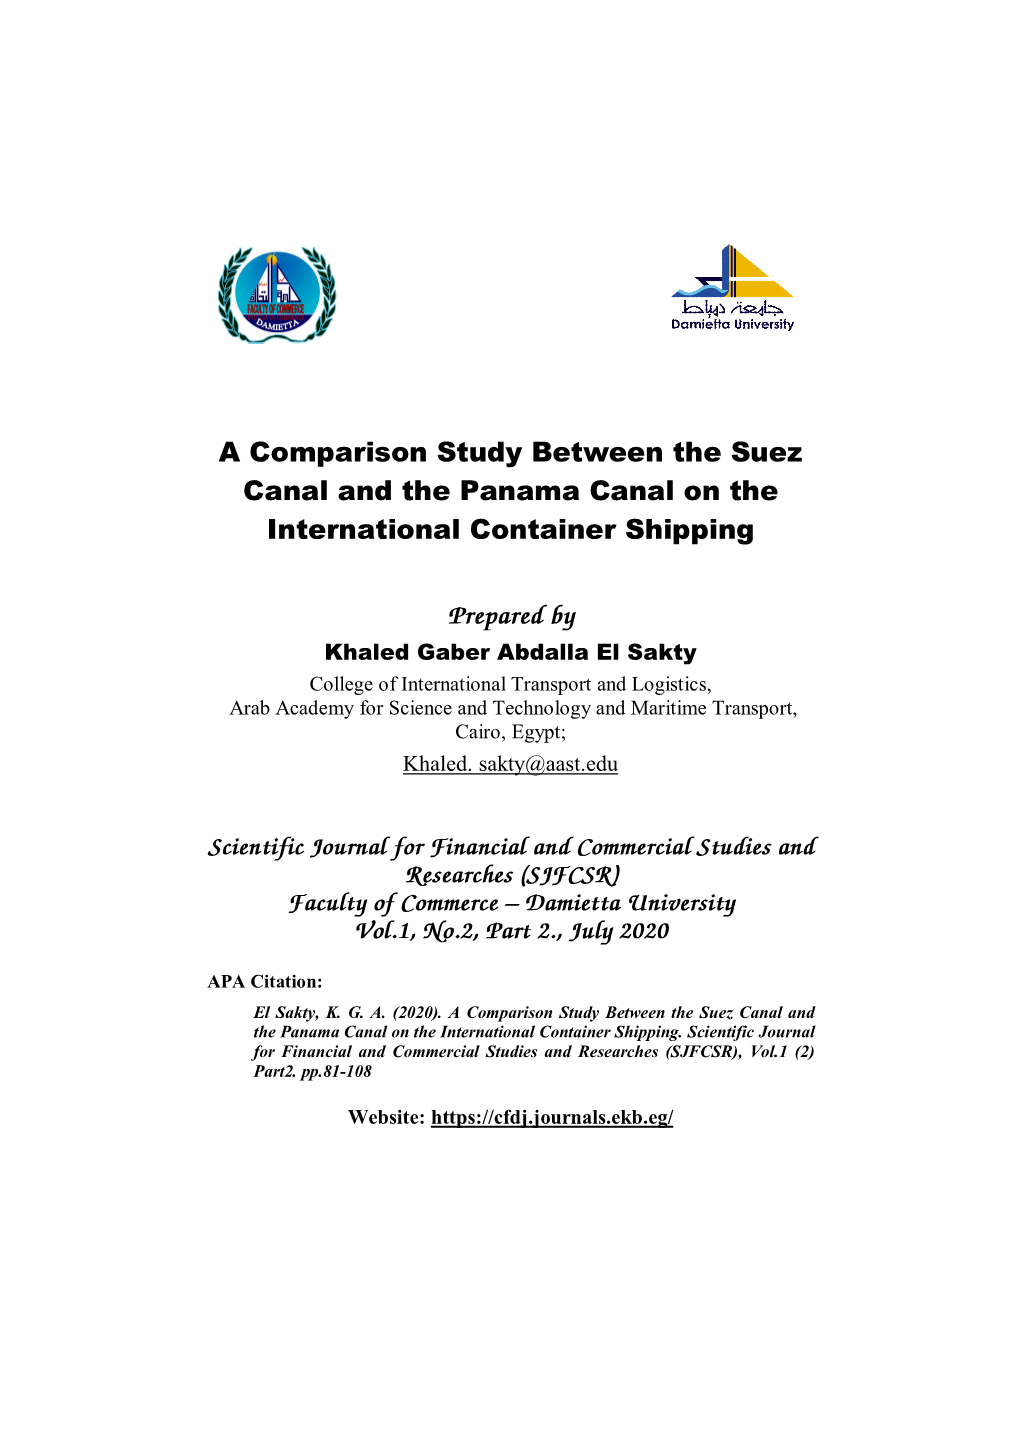 A Comparison Study Between the Suez Canal and the Panama Canal on the International Container Shipping